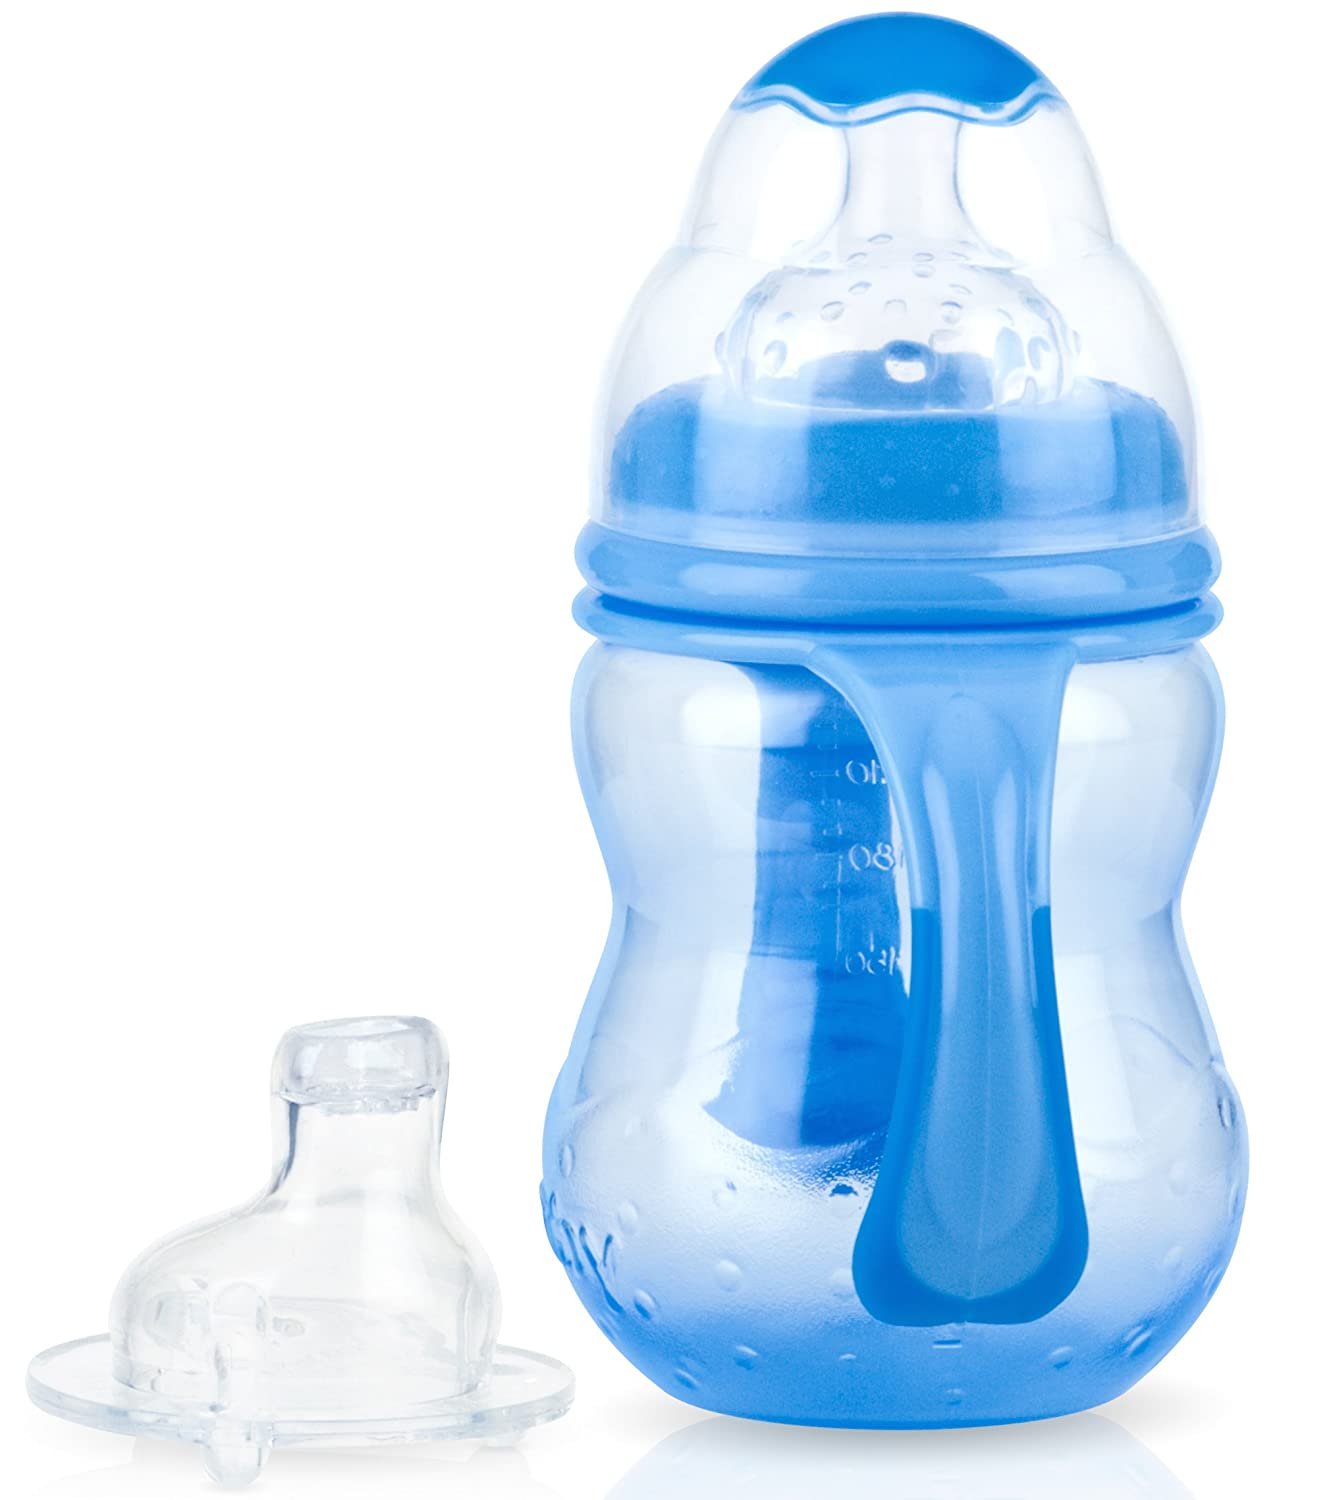 Nuby 3-Stage Wide Neck No Spill Bottle with Handles And Non-Drip Juice Spout, 3 Months, 8 Ounce, Teal